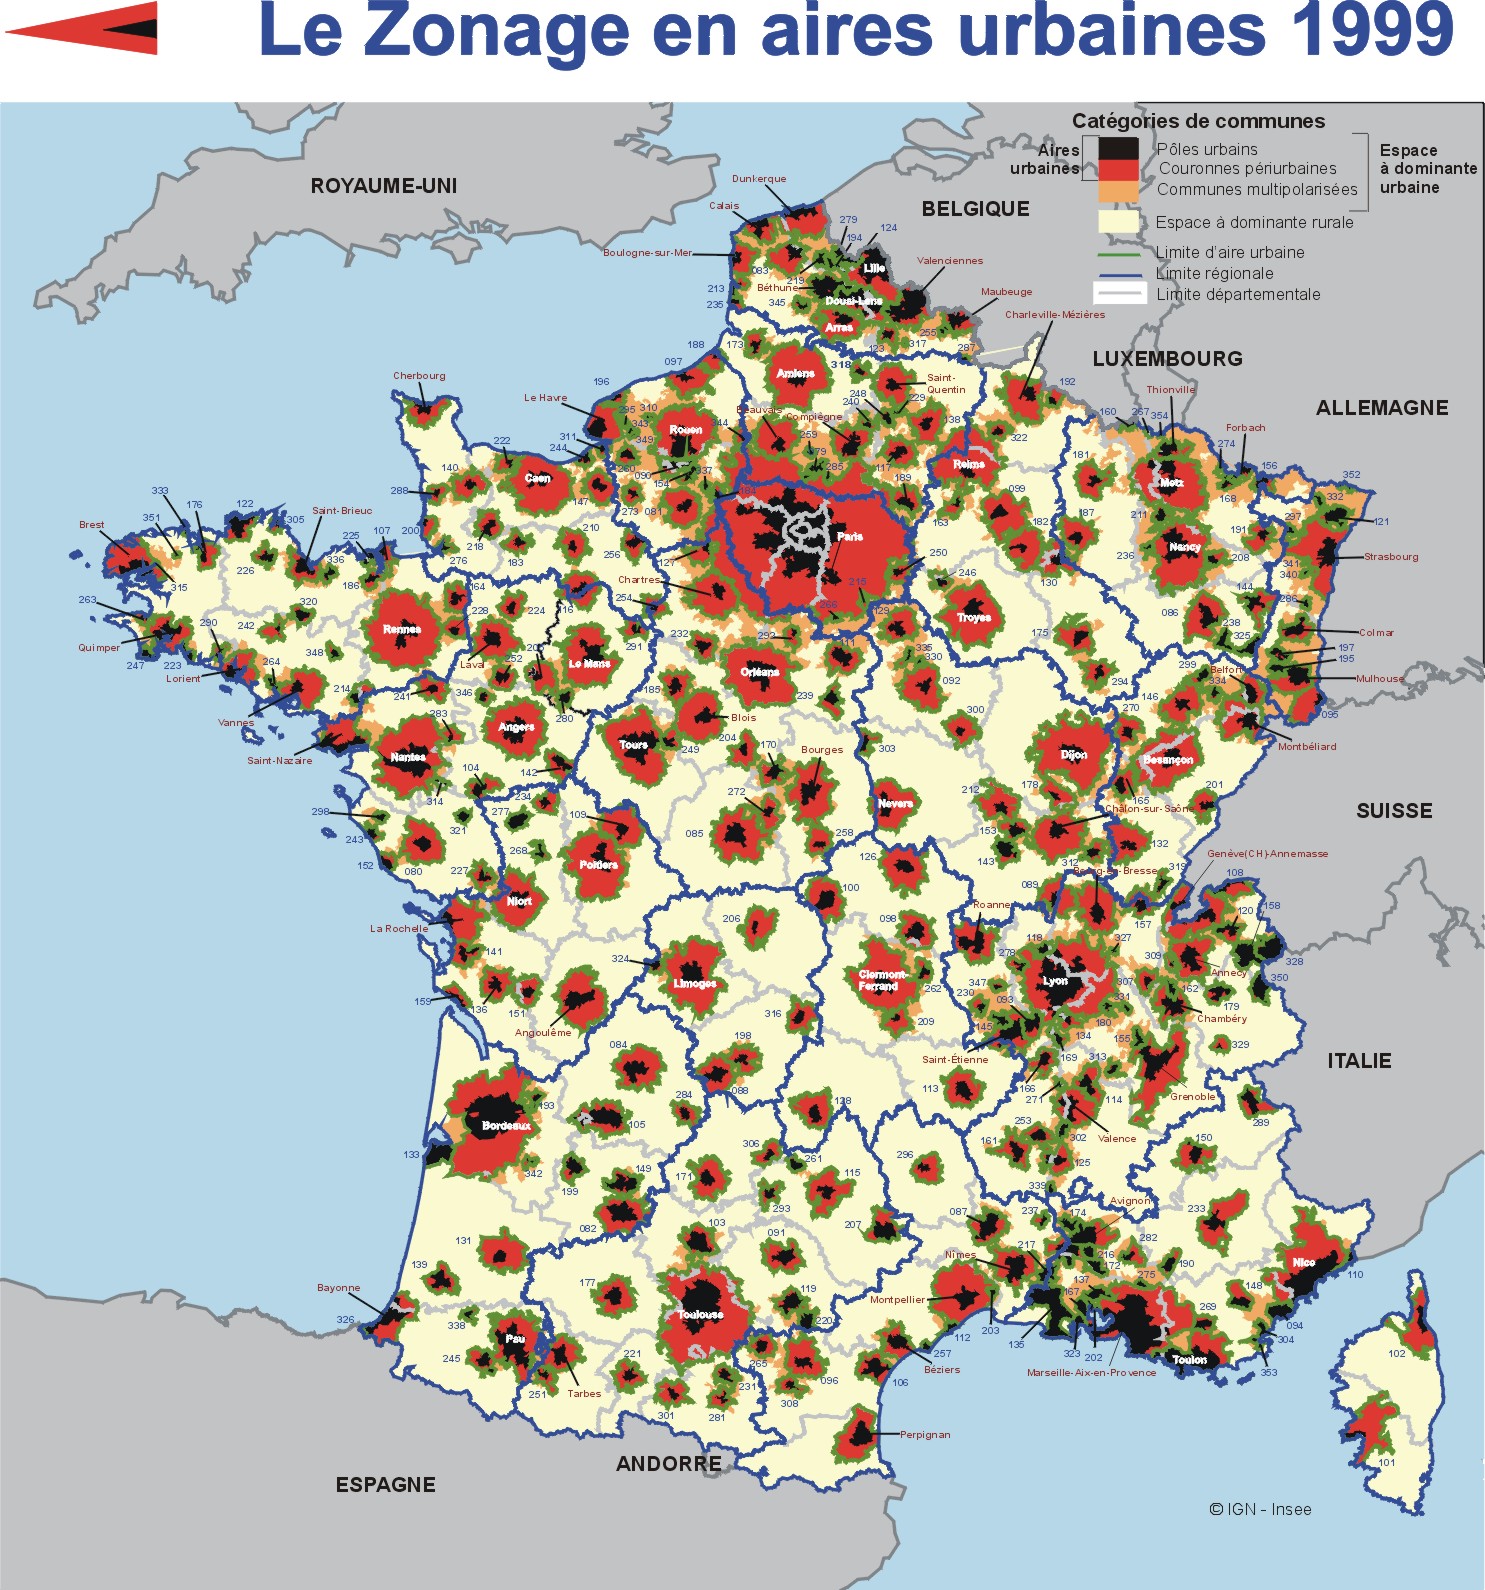 http://www.populationdata.net/images/cartes/france_aires_urbaines.jpg